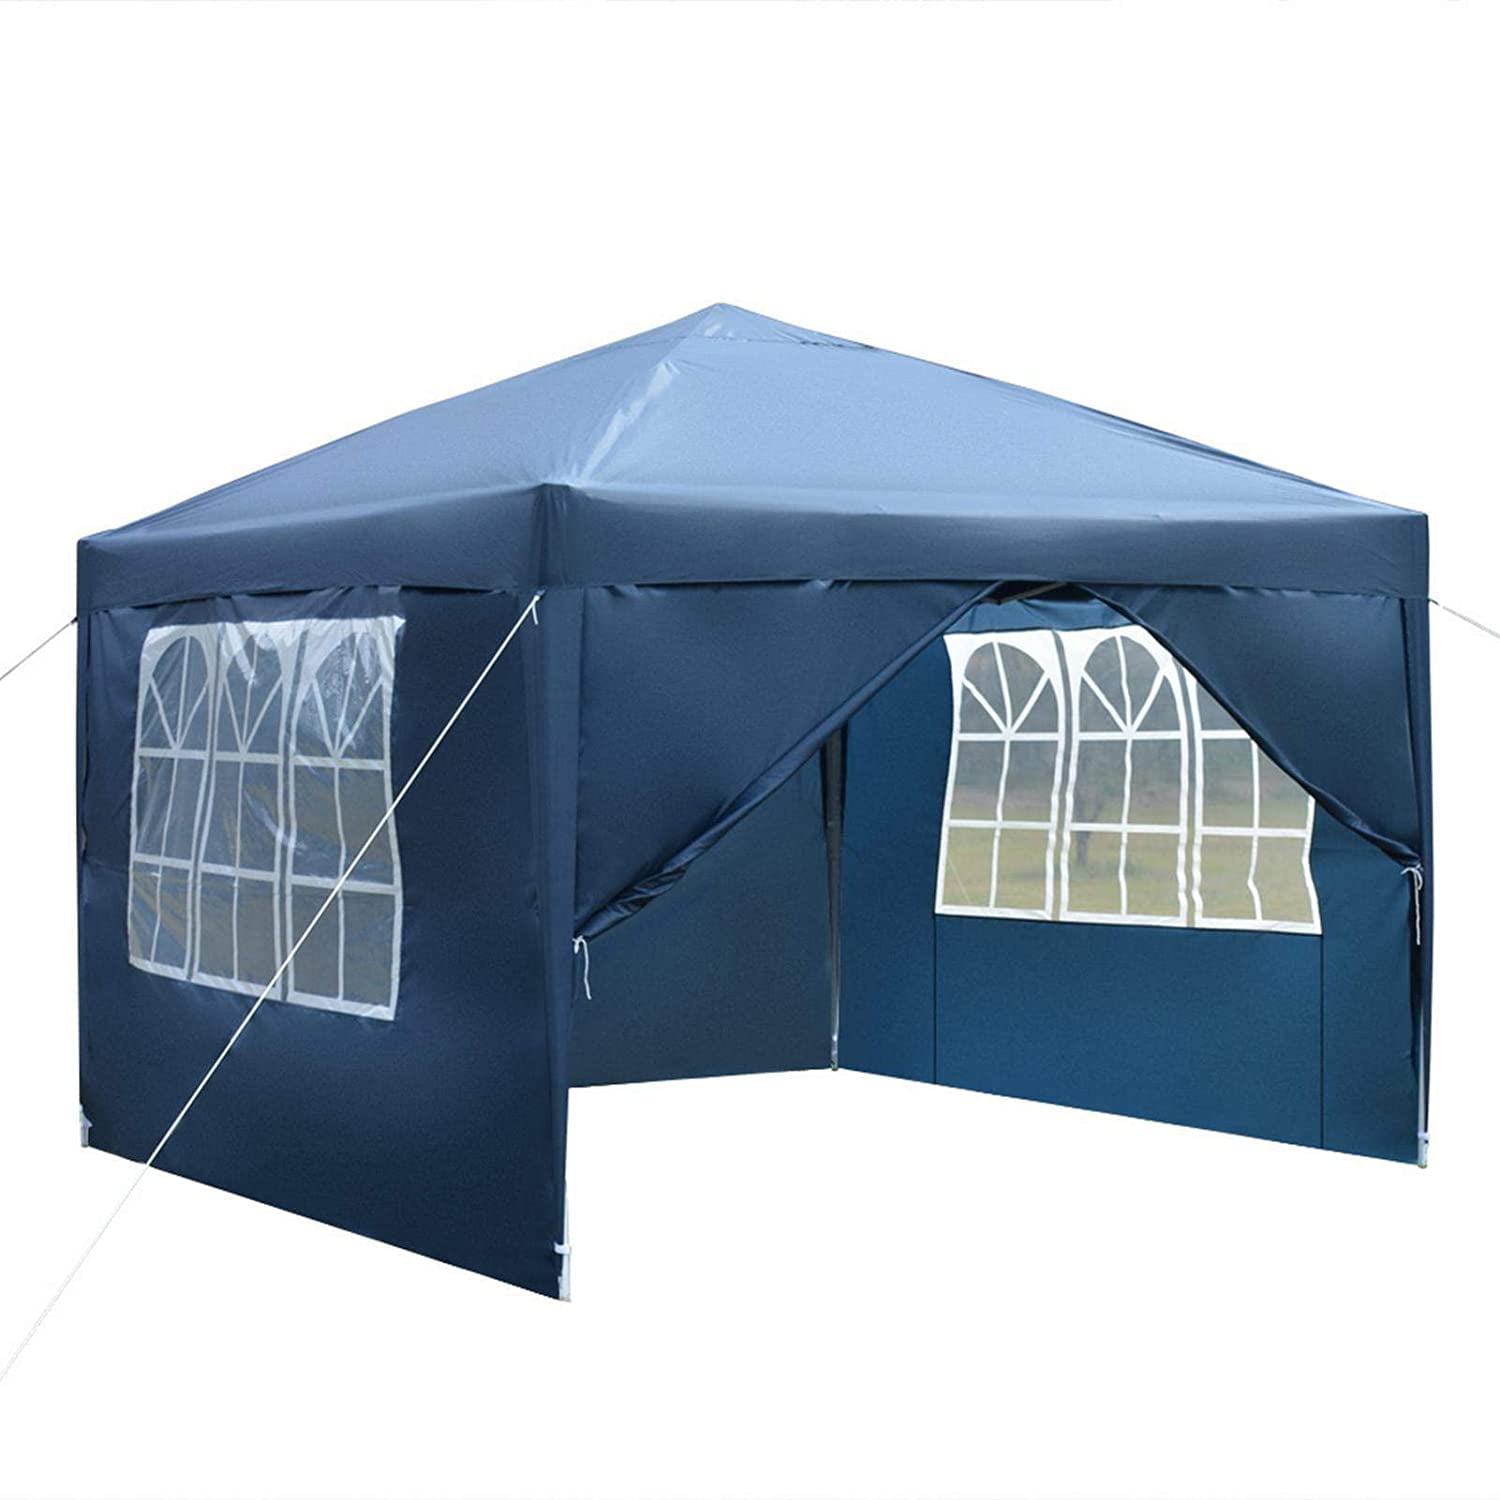 3 x 3M Waterproof Gazebo Marquee Awning Canopy Outdoor Wedding Garden Party Tent 